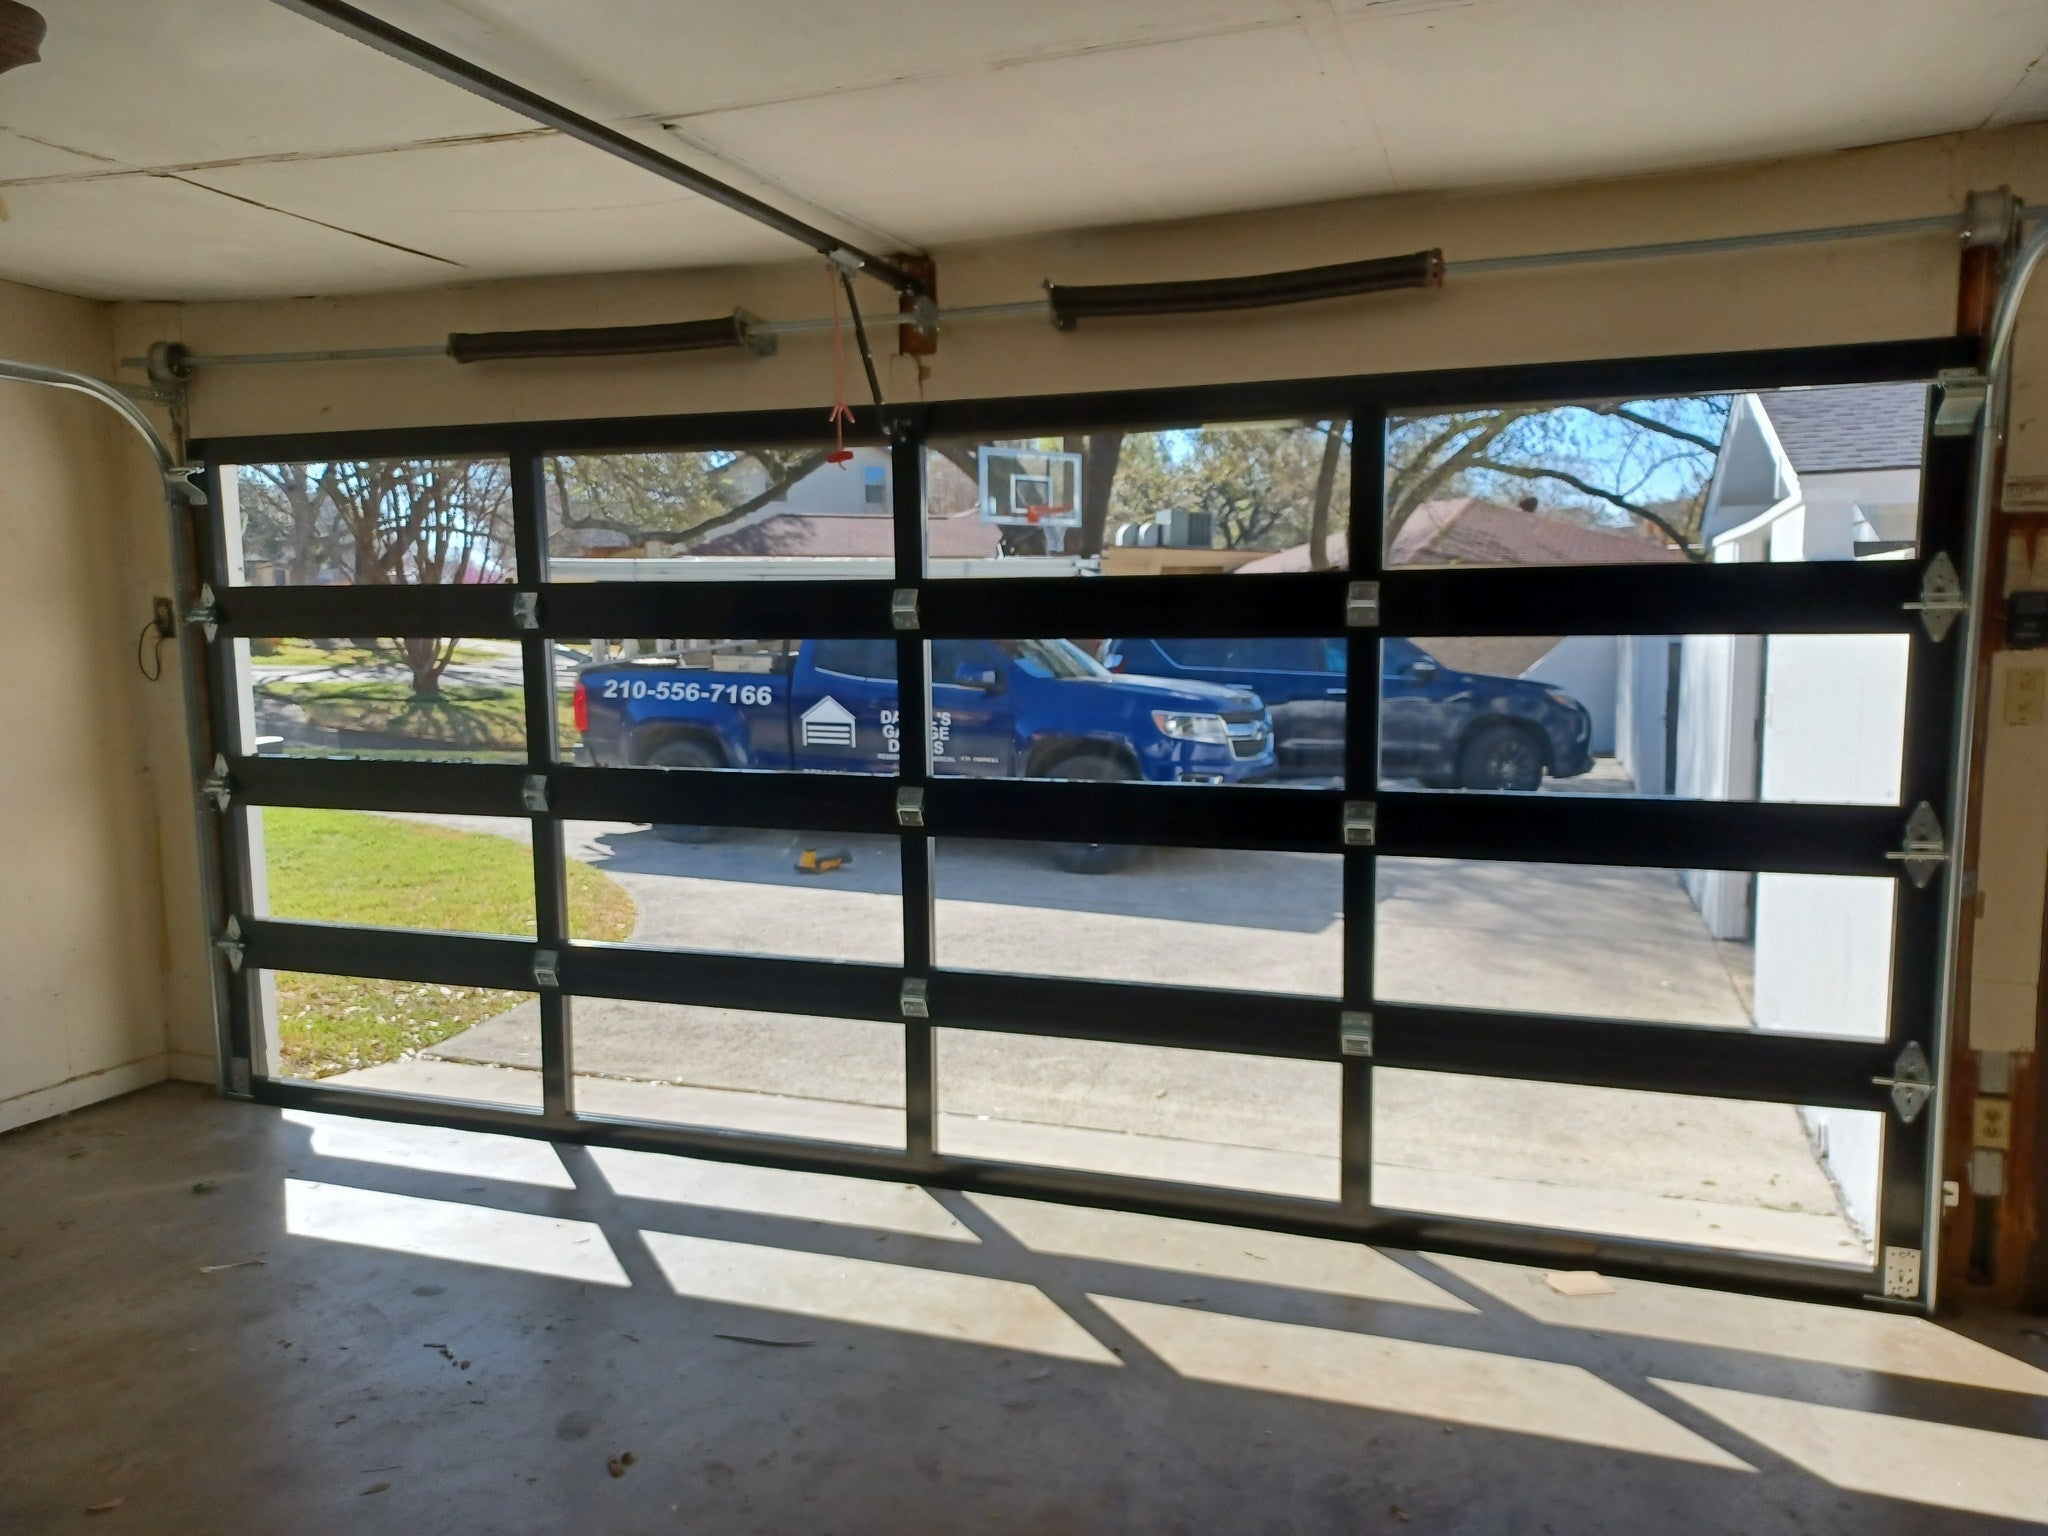 18 FT Wide By 8 FT Tall Full View Garage Door Matt Black Finish With Clear Glass